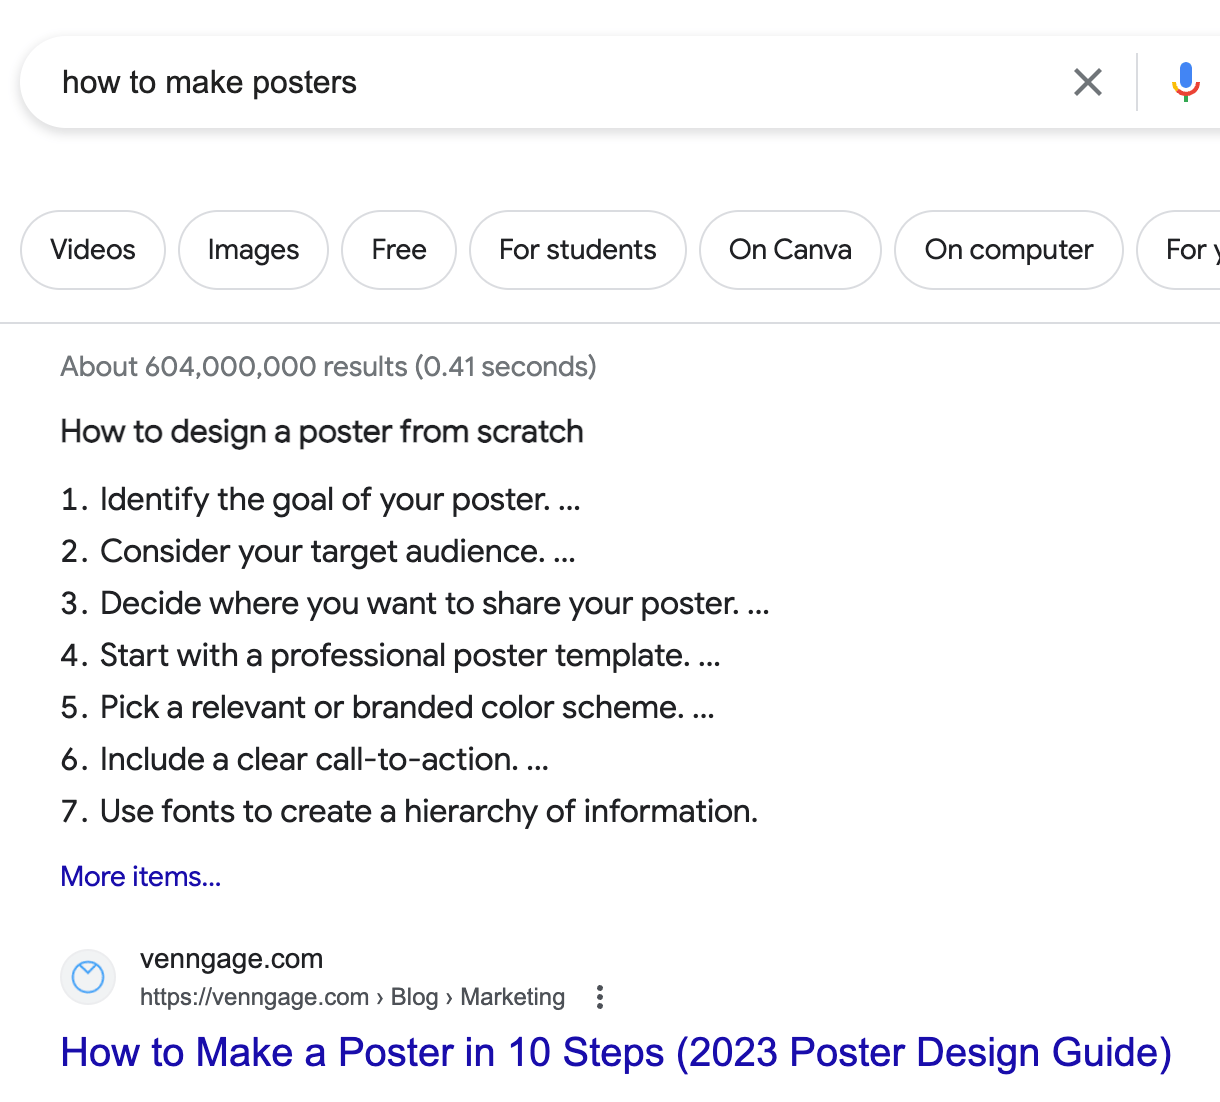 Featured snippet for "how to make posters"
